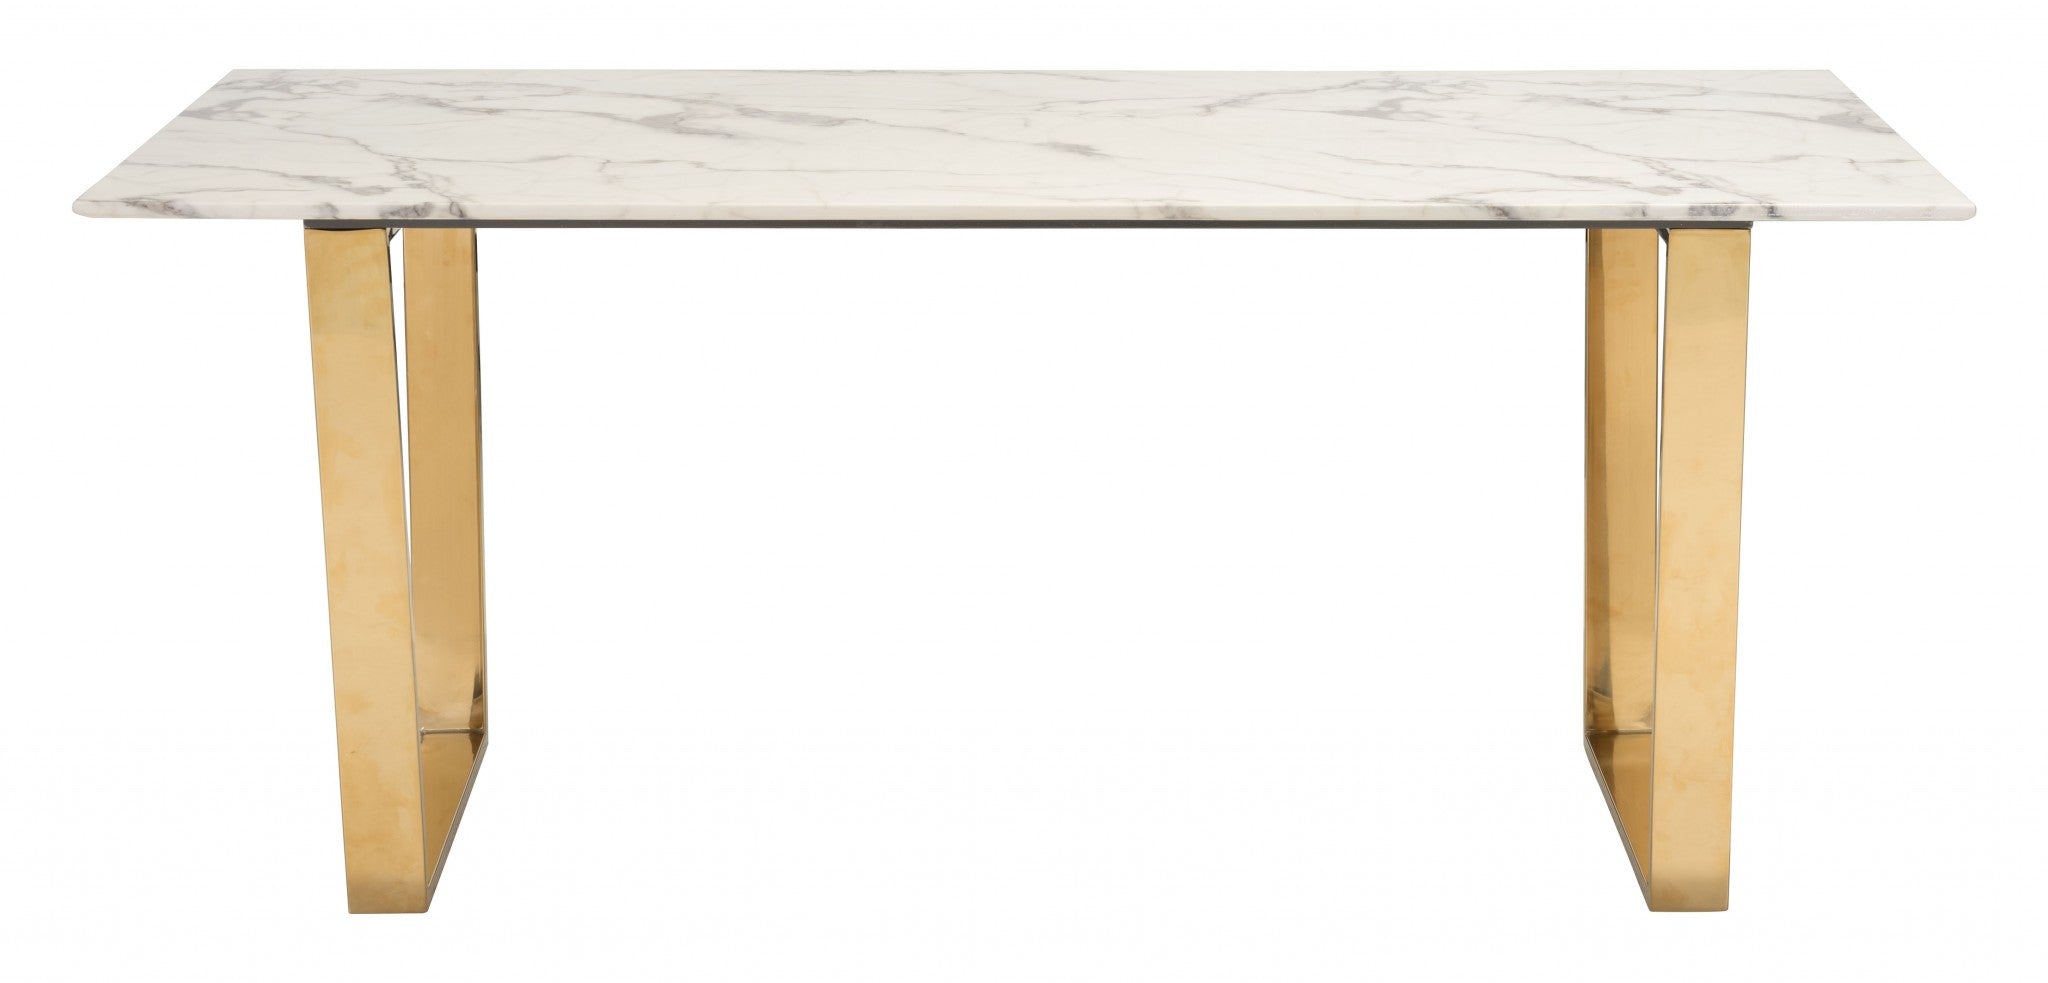 Designer's Choice White Faux Marble and Gold Dining Table